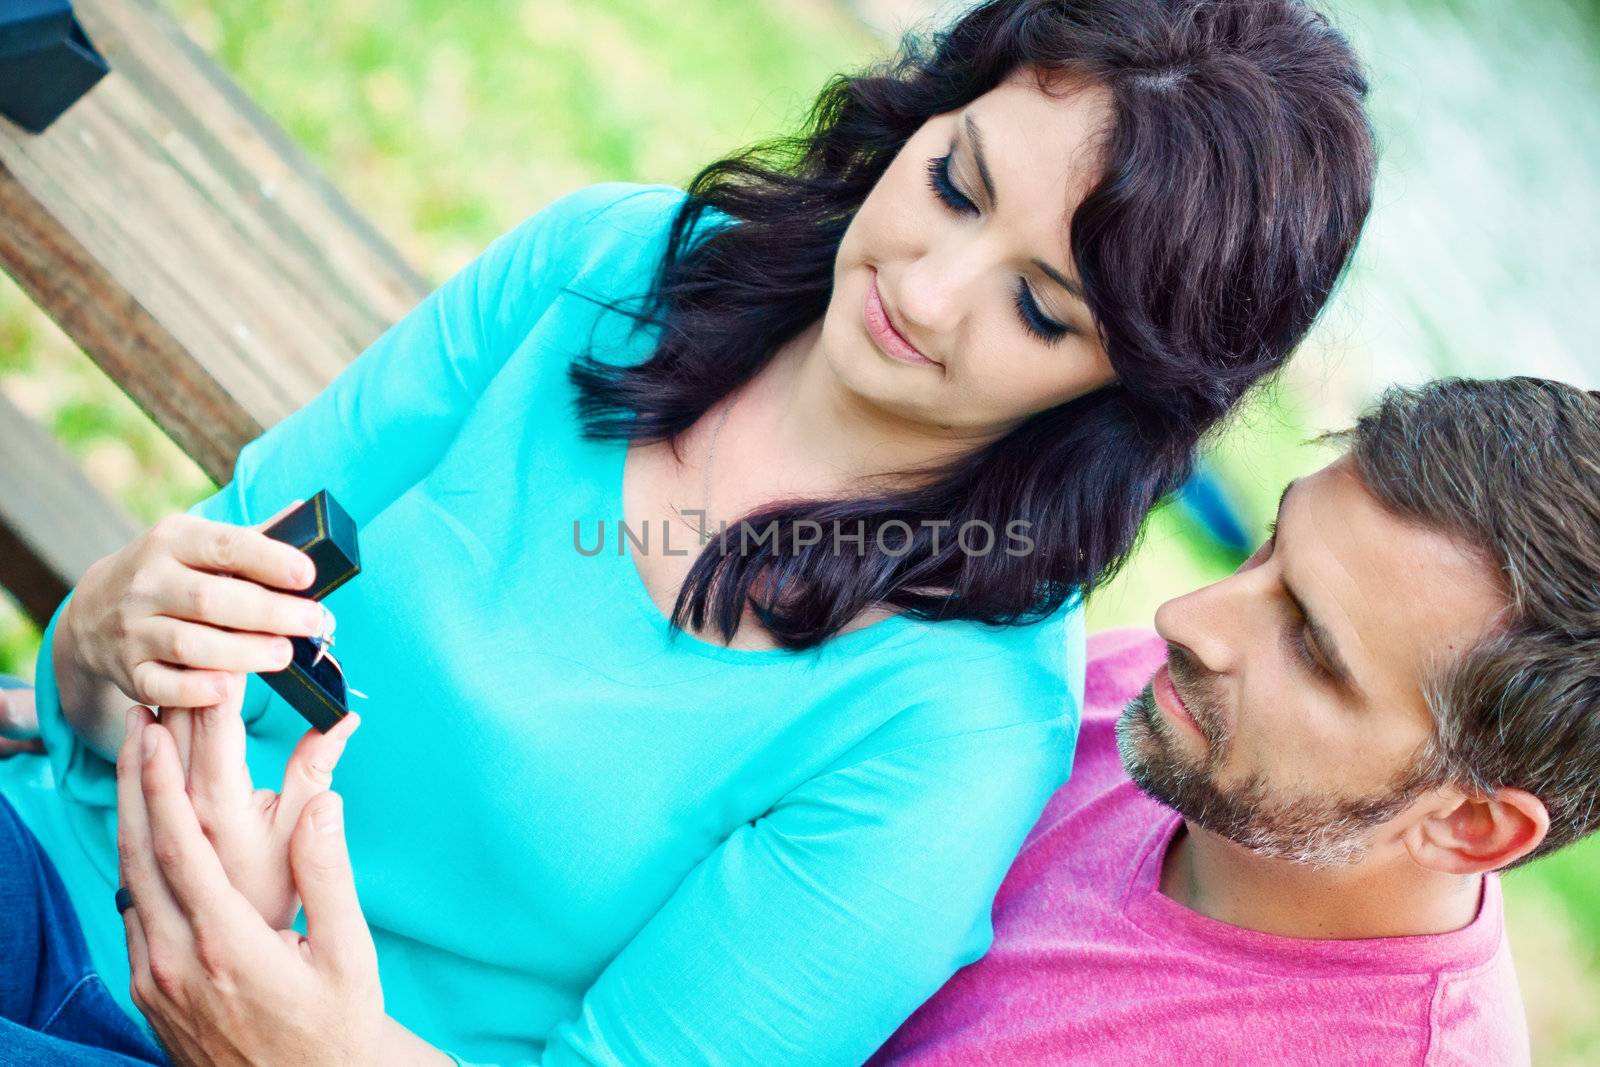 Portraite of a happy couple outdoors in the park 